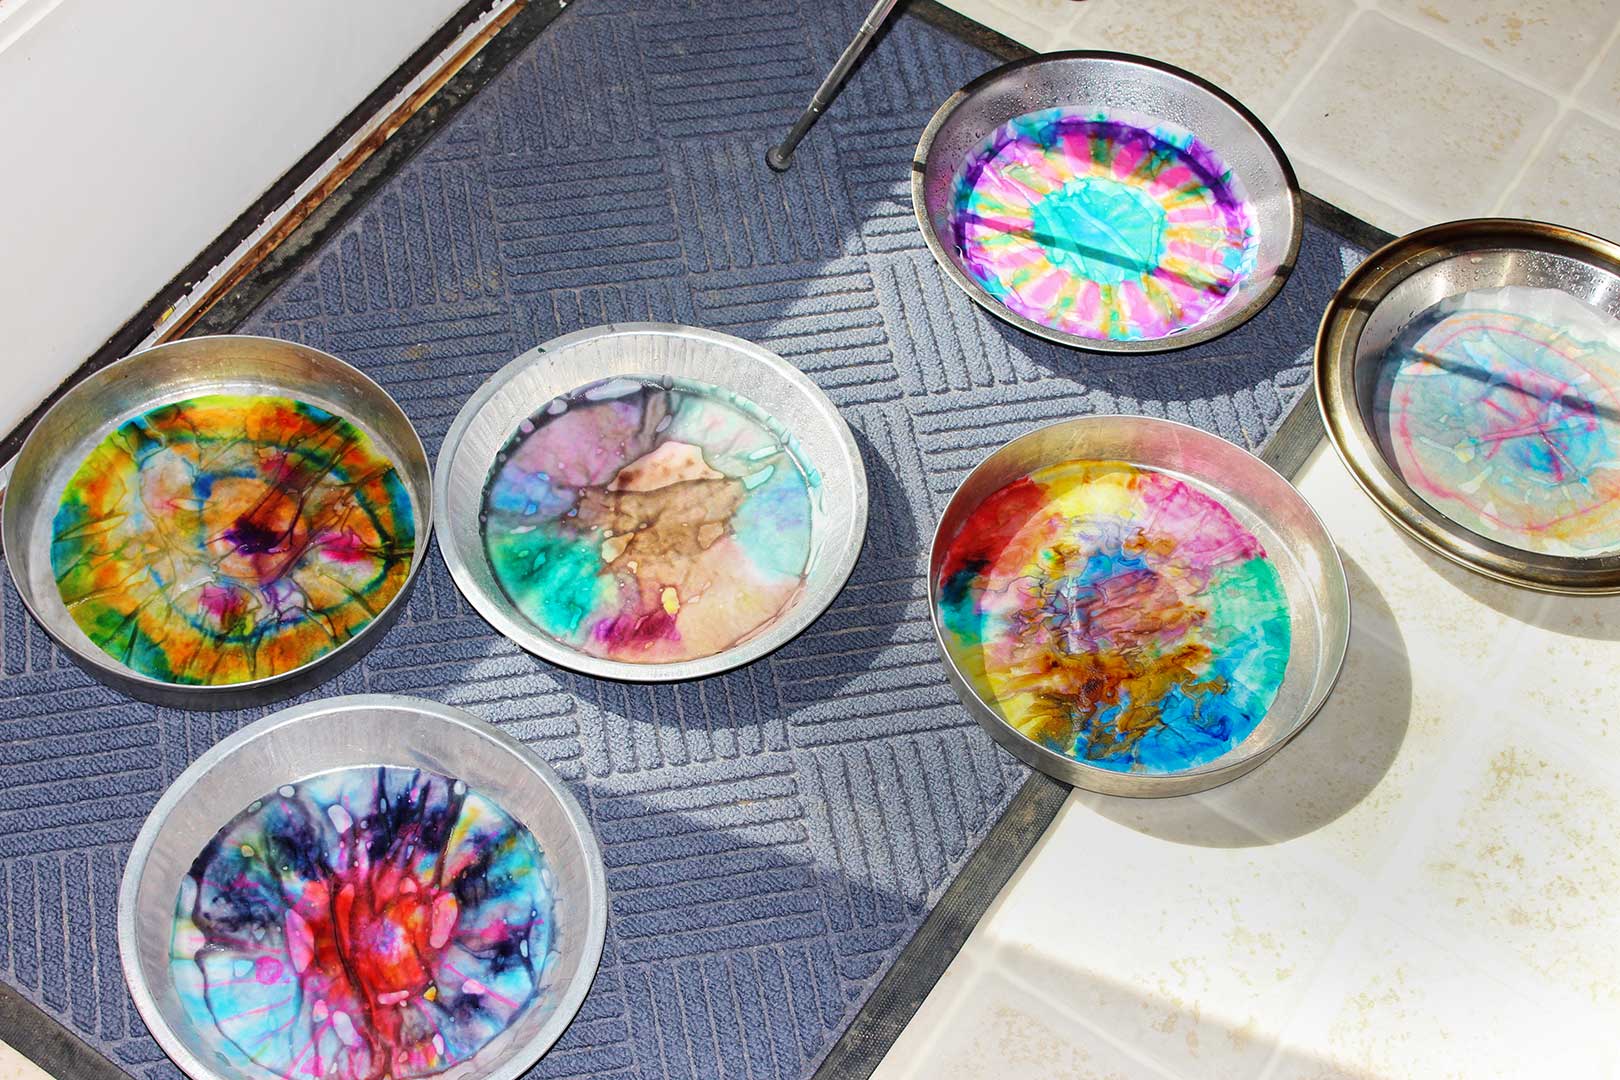 Colorful coffee filters drying after being sprayed with water to bleed the colors.